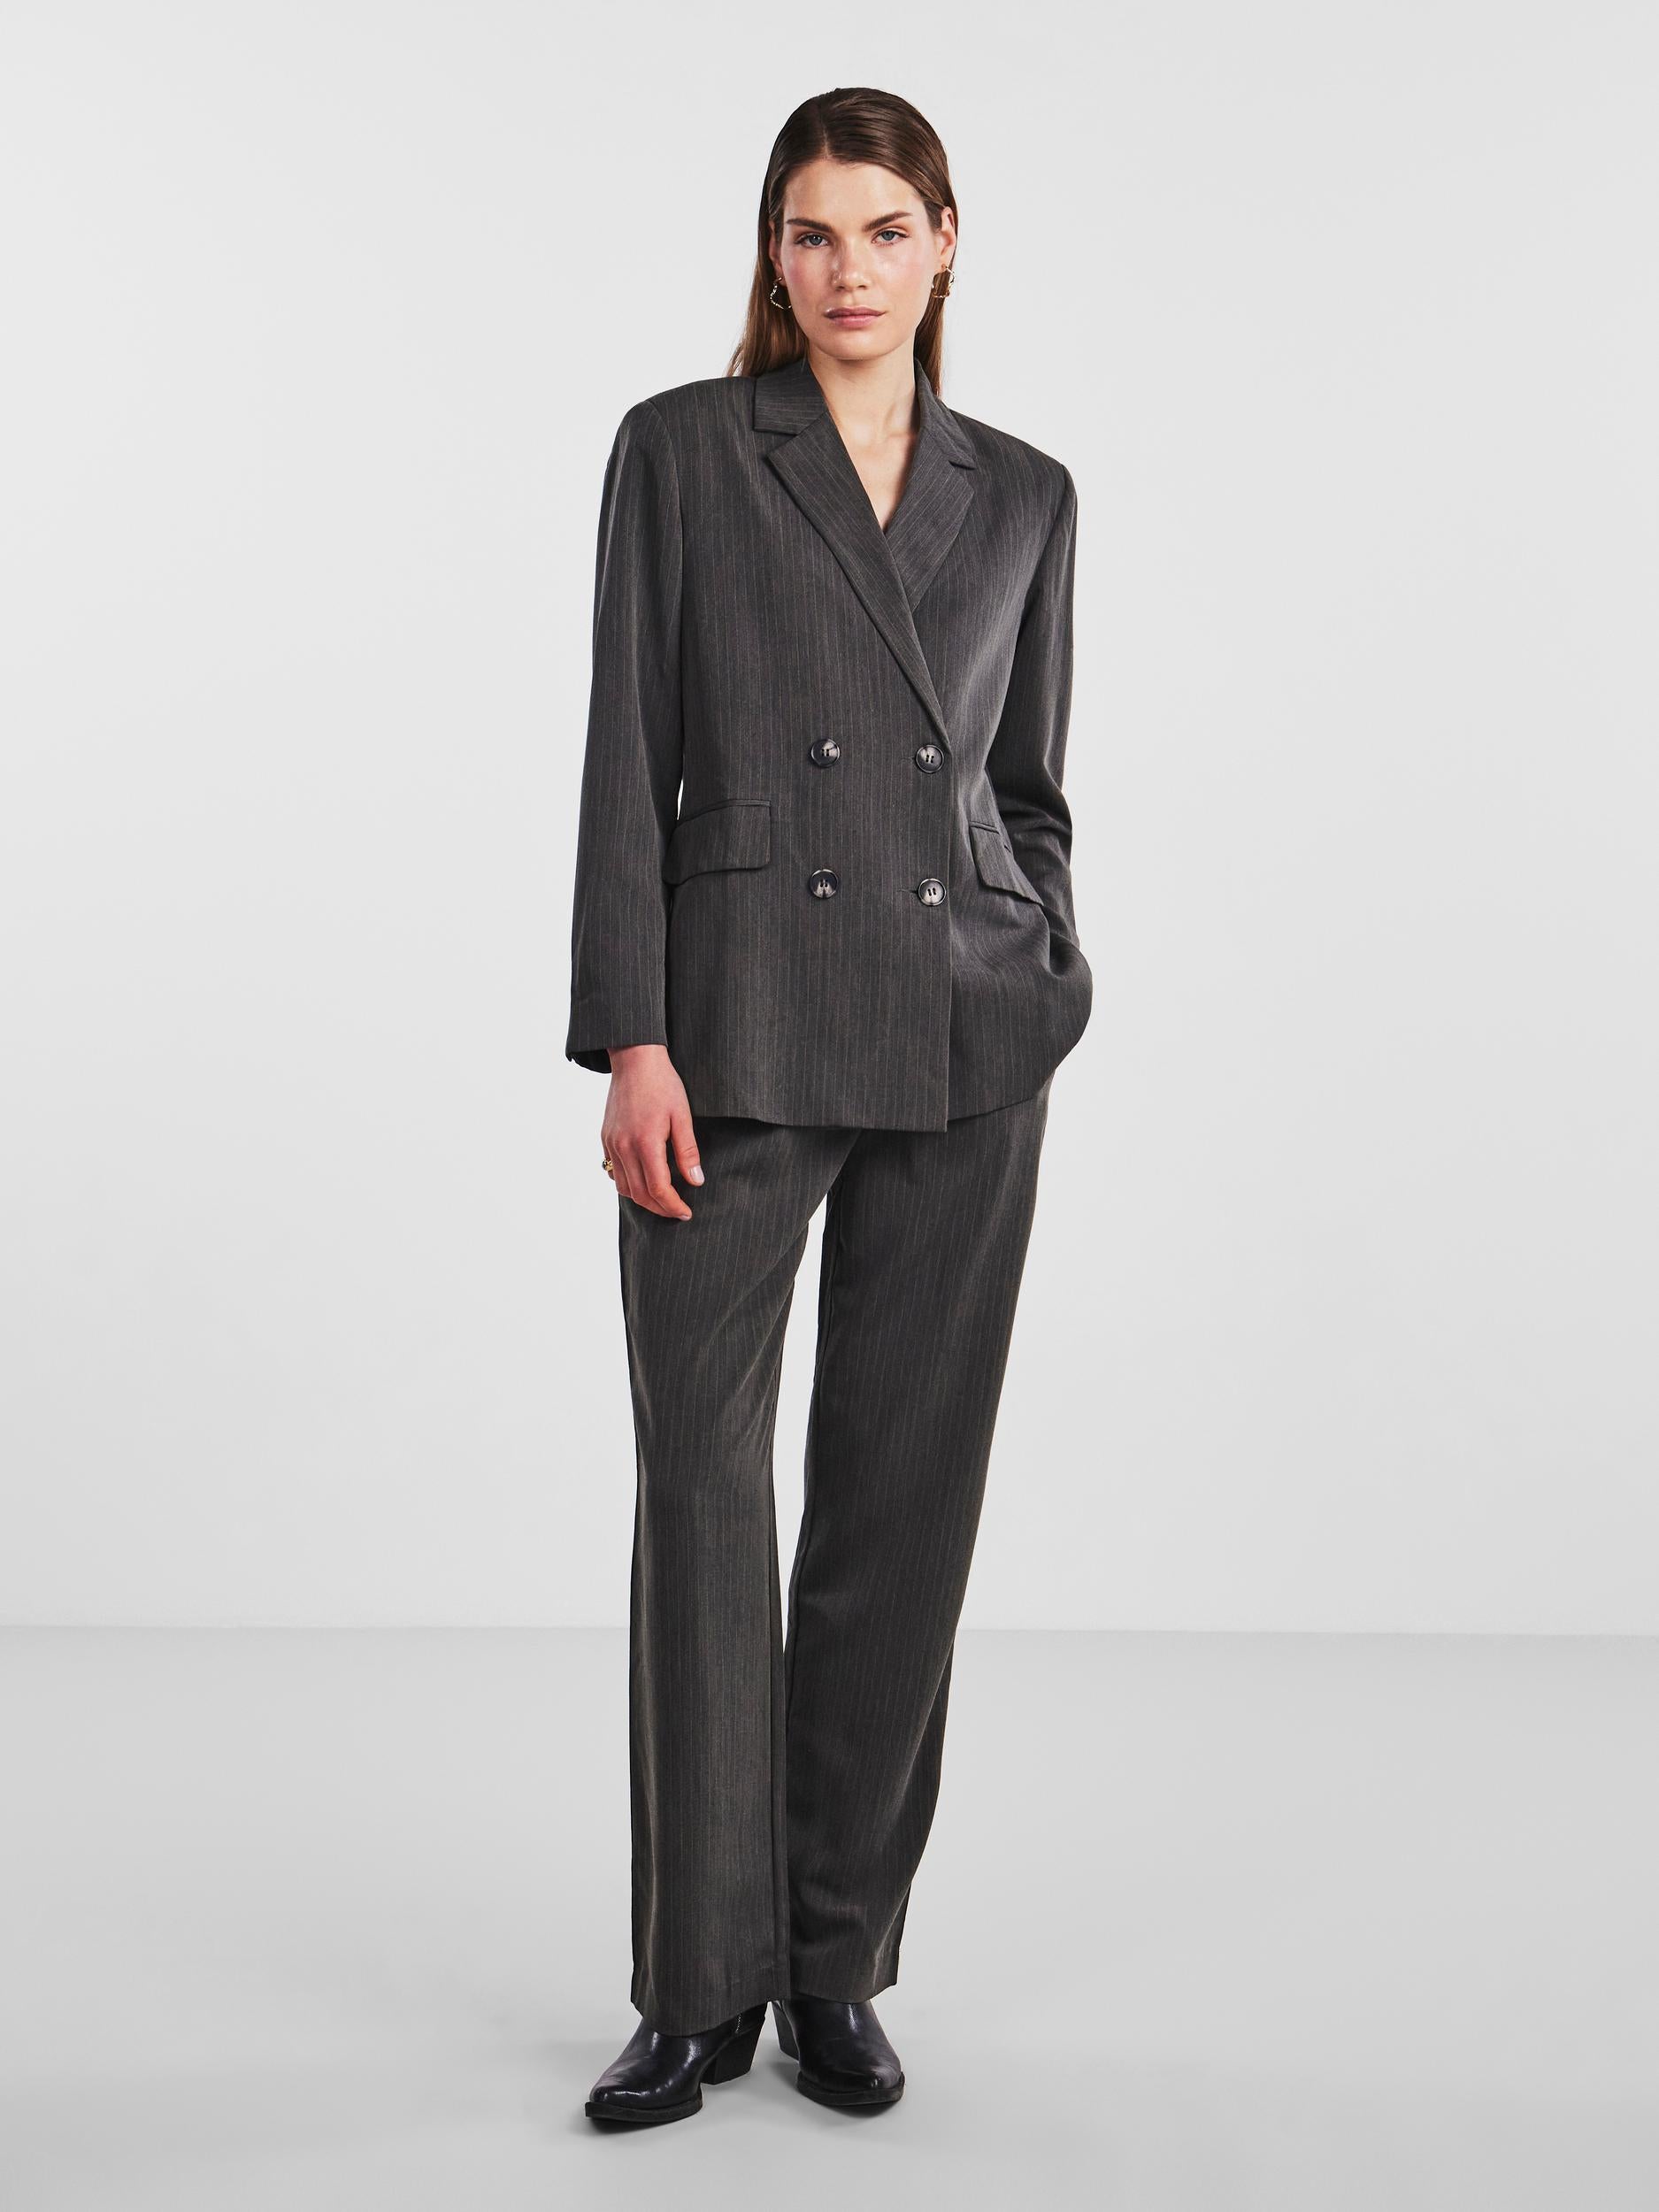 Selected Femme "Pinly" Pinstripe Blazer